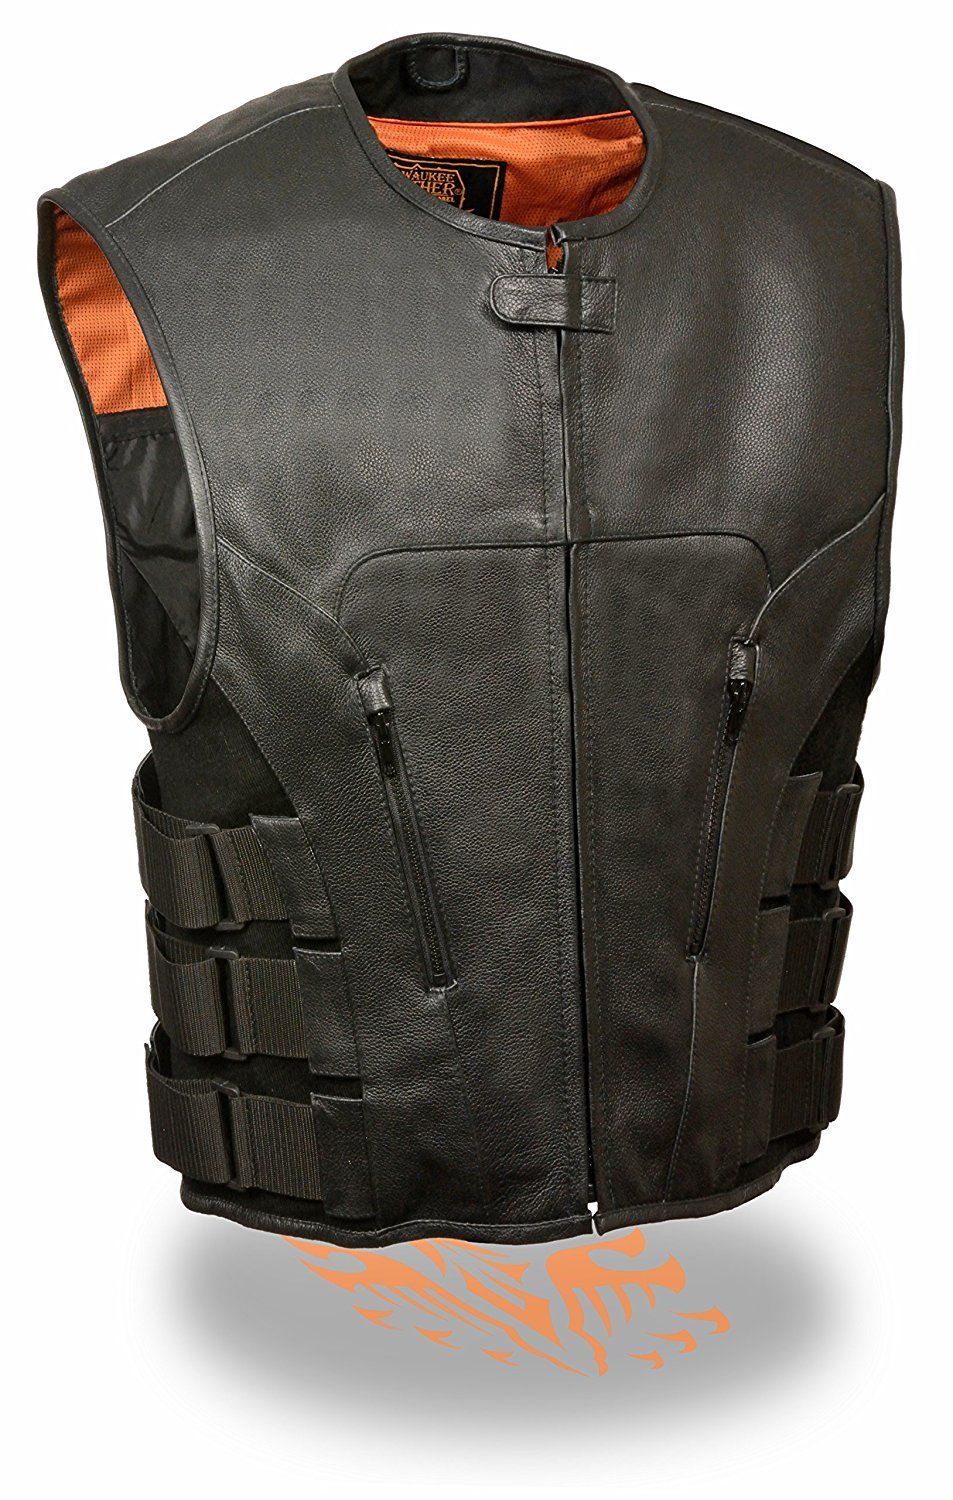 Bullet proof vest for <a href="https://amzn.to/2x3scfd">$109.99</a>